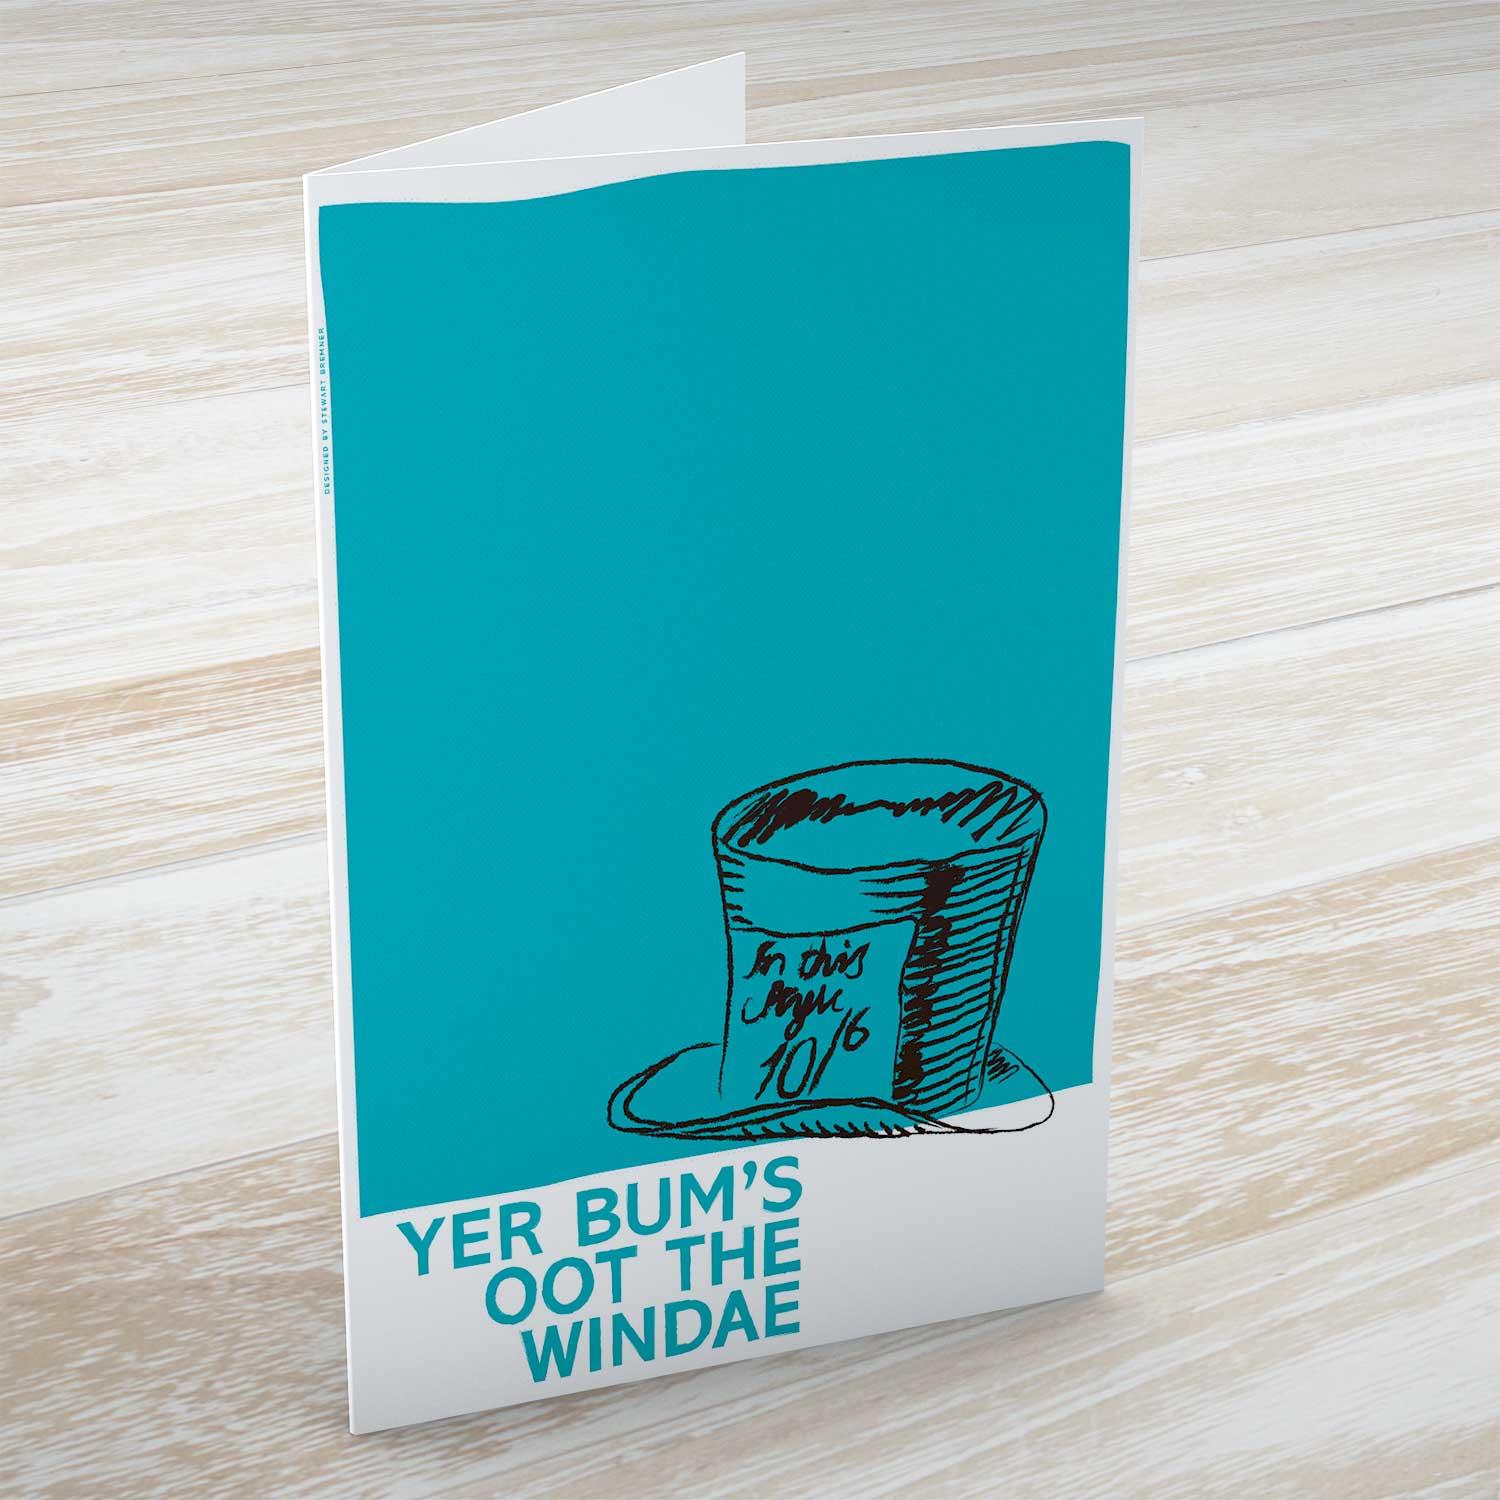 Yer Bum's Oot the Windae Greeting Card from an original painting by artist Stewart Bremner